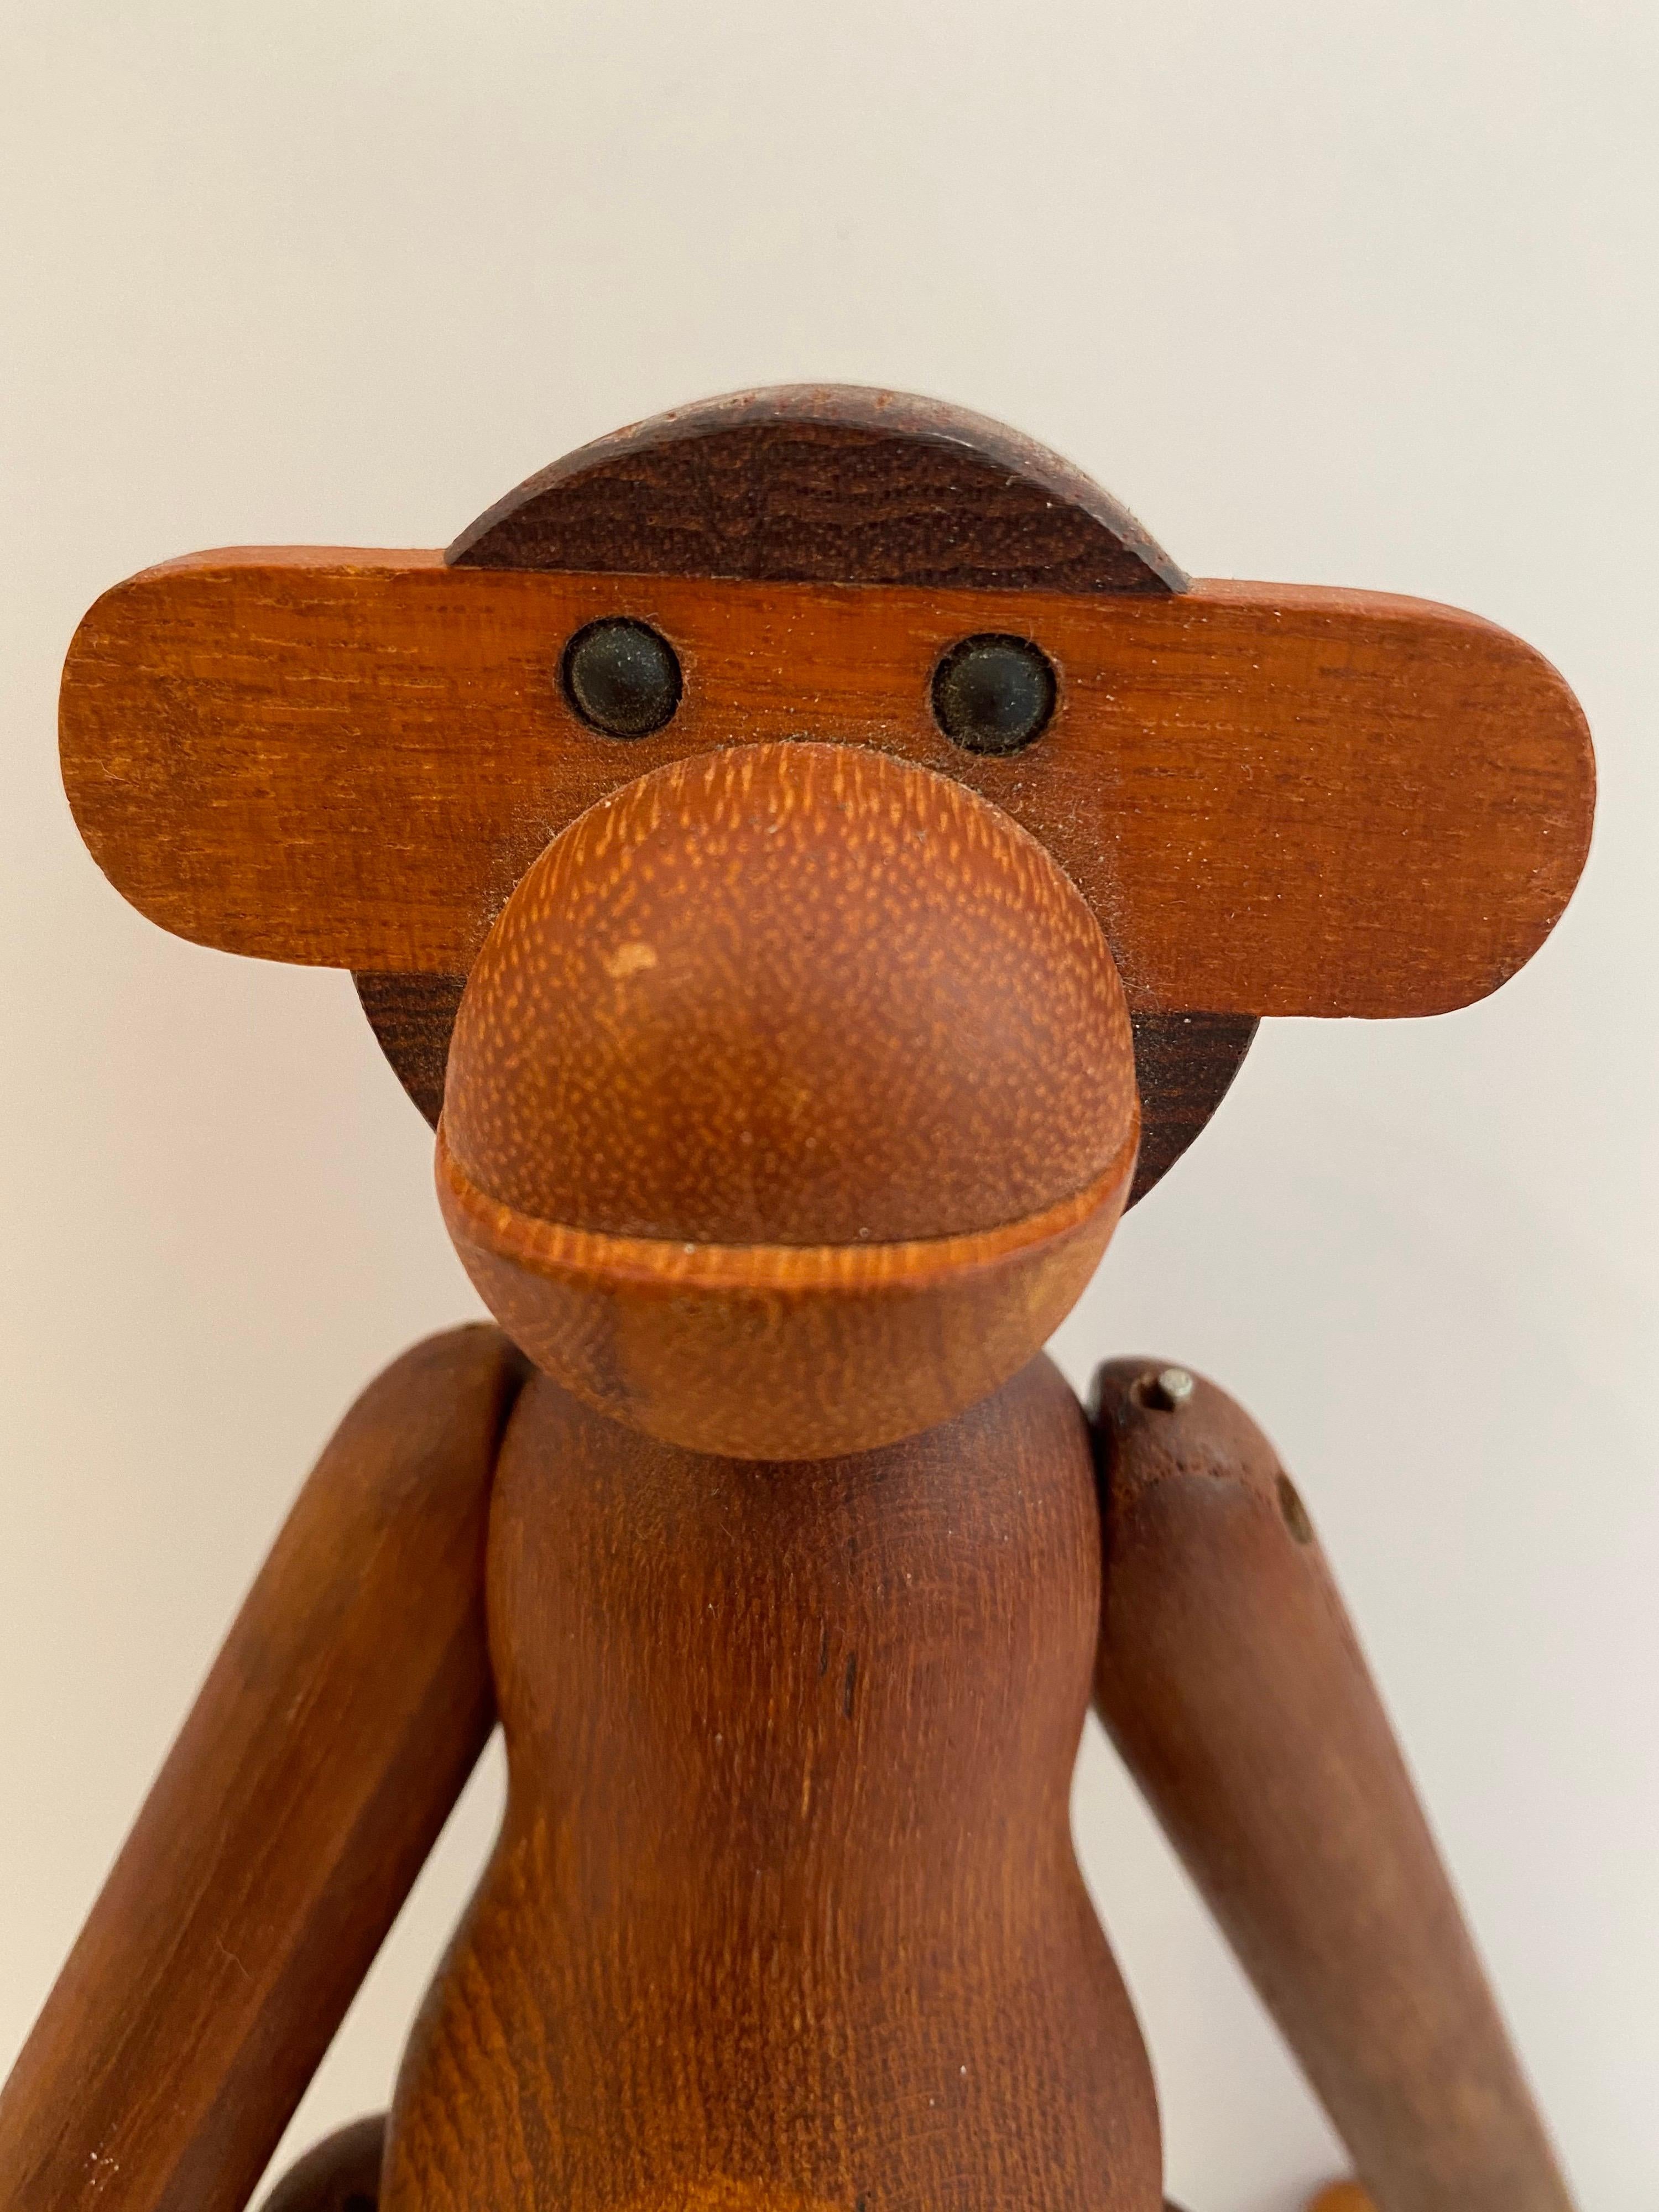 Kay Bojesen articulating and jointed teak monkey. Bought from the original owner who had it in the early 1960's. At some point in the last 15 years he had his rubber bands replaced properly. Nice color and patina to the wood! Signed on bottom of one